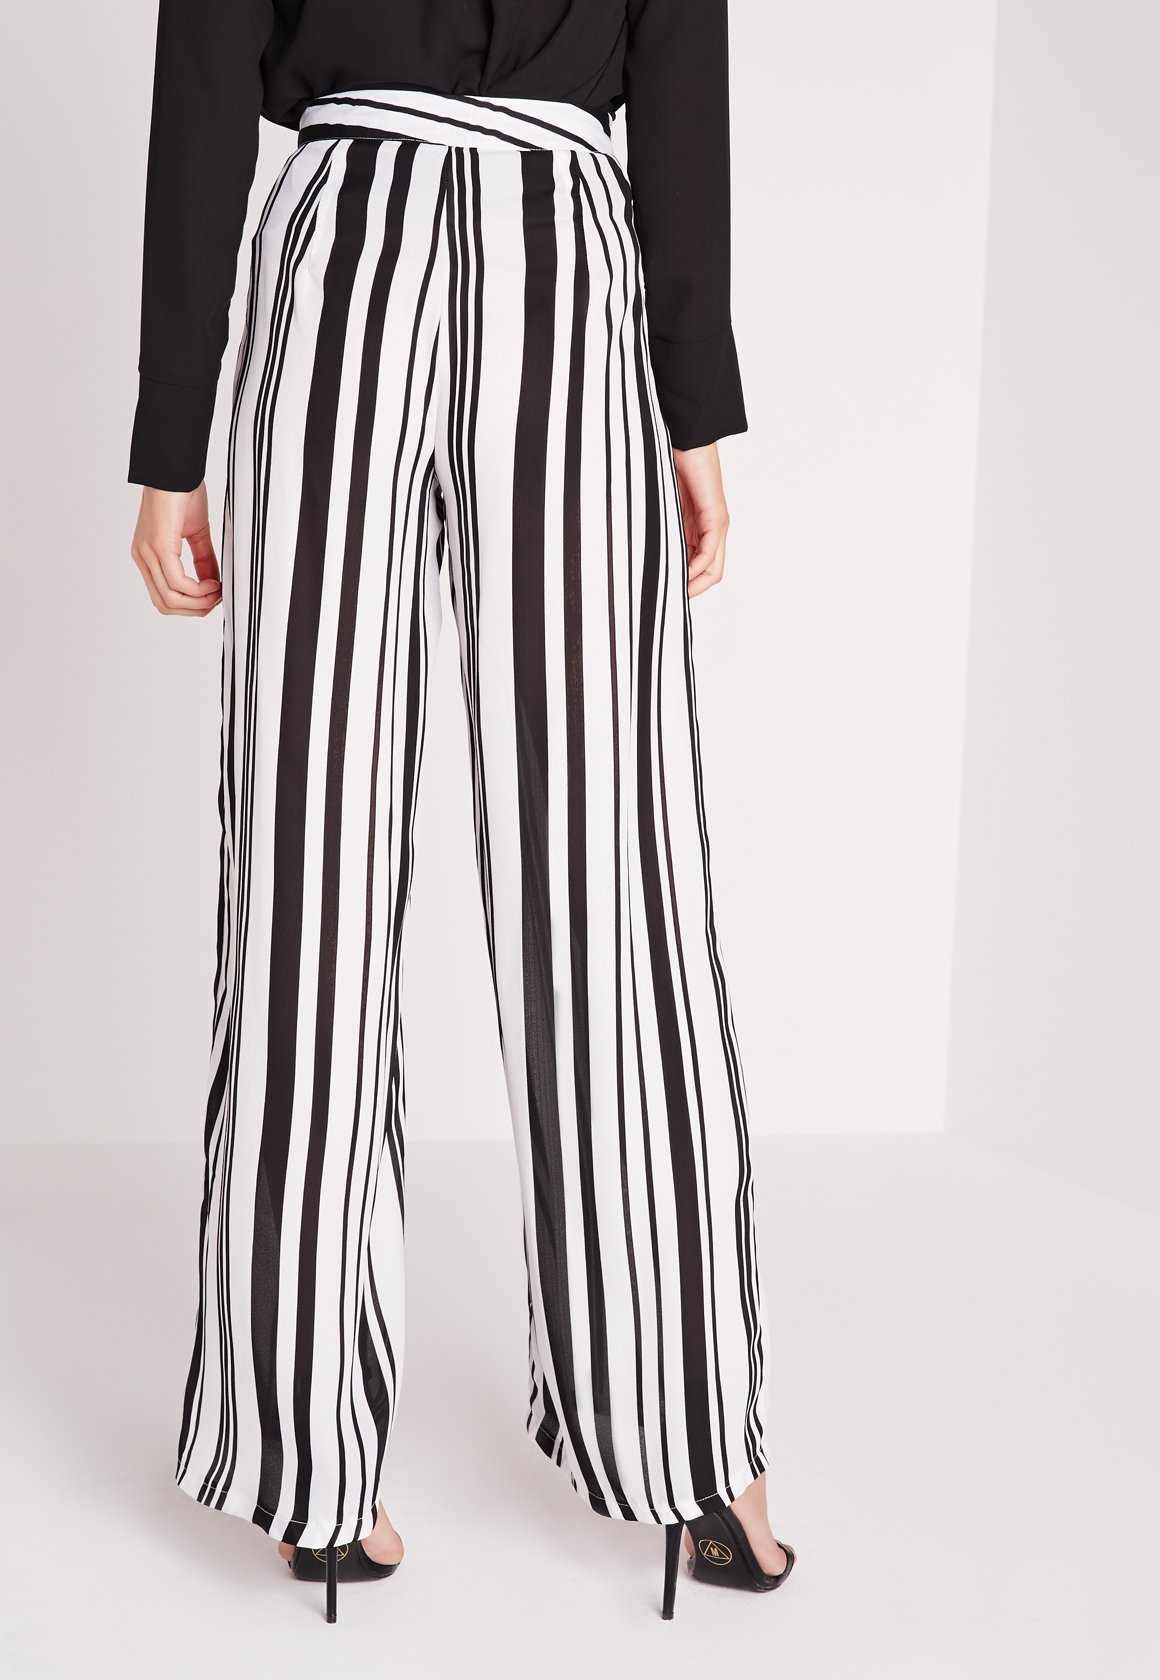 Lyst - Missguided Stripe Wide Leg Trousers White in White